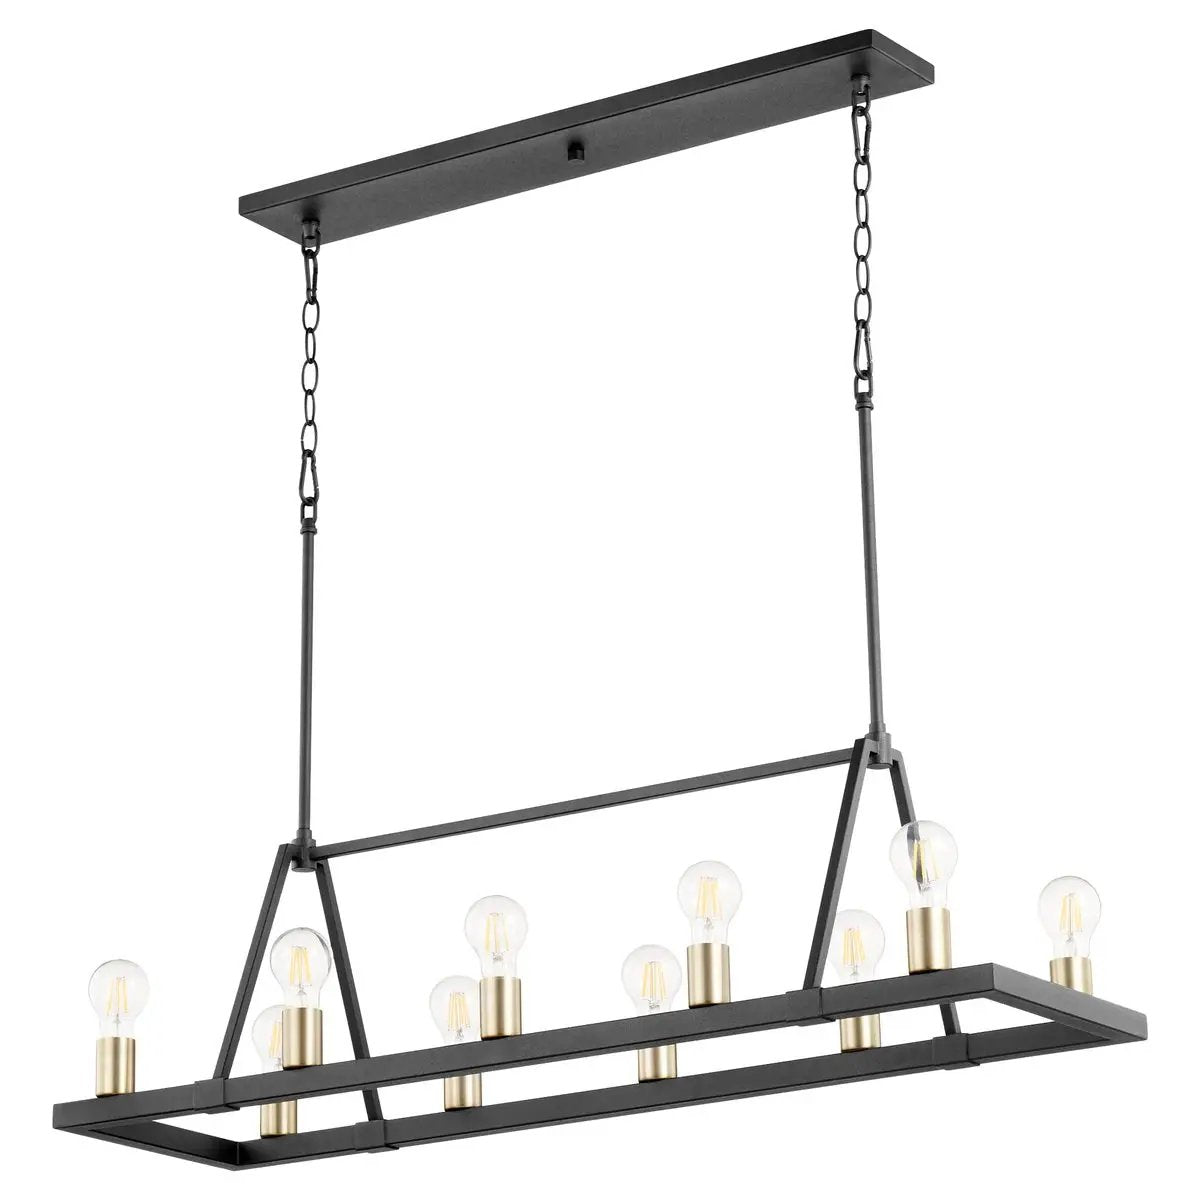 Farmhouse kitchen island lighting fixture with geometric stacked boxed frame, noir/aged brass finishes, and ten exposed medium base sockets. Suitable for indoor kitchens, dining rooms, living rooms, entry foyers, outdoor covered patios, and grilling areas. Damp listed.